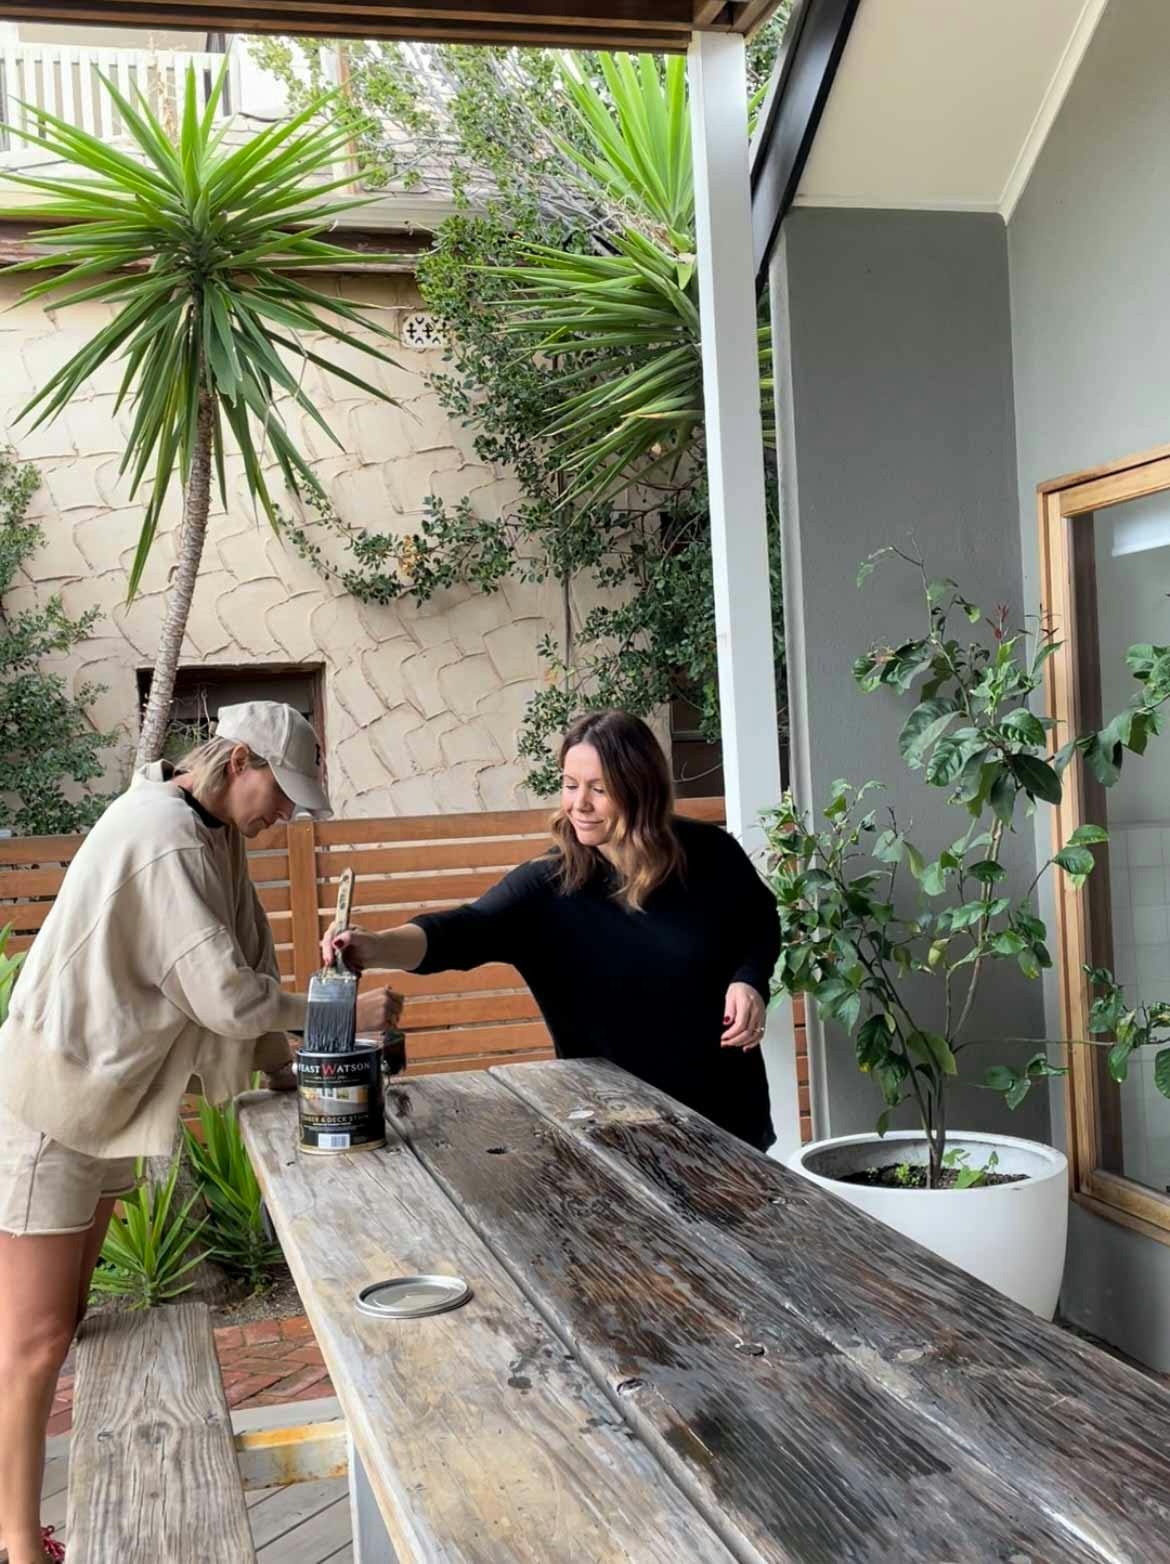 The Style Hosts applying Timber & Deck Stain on an outdoor timber table